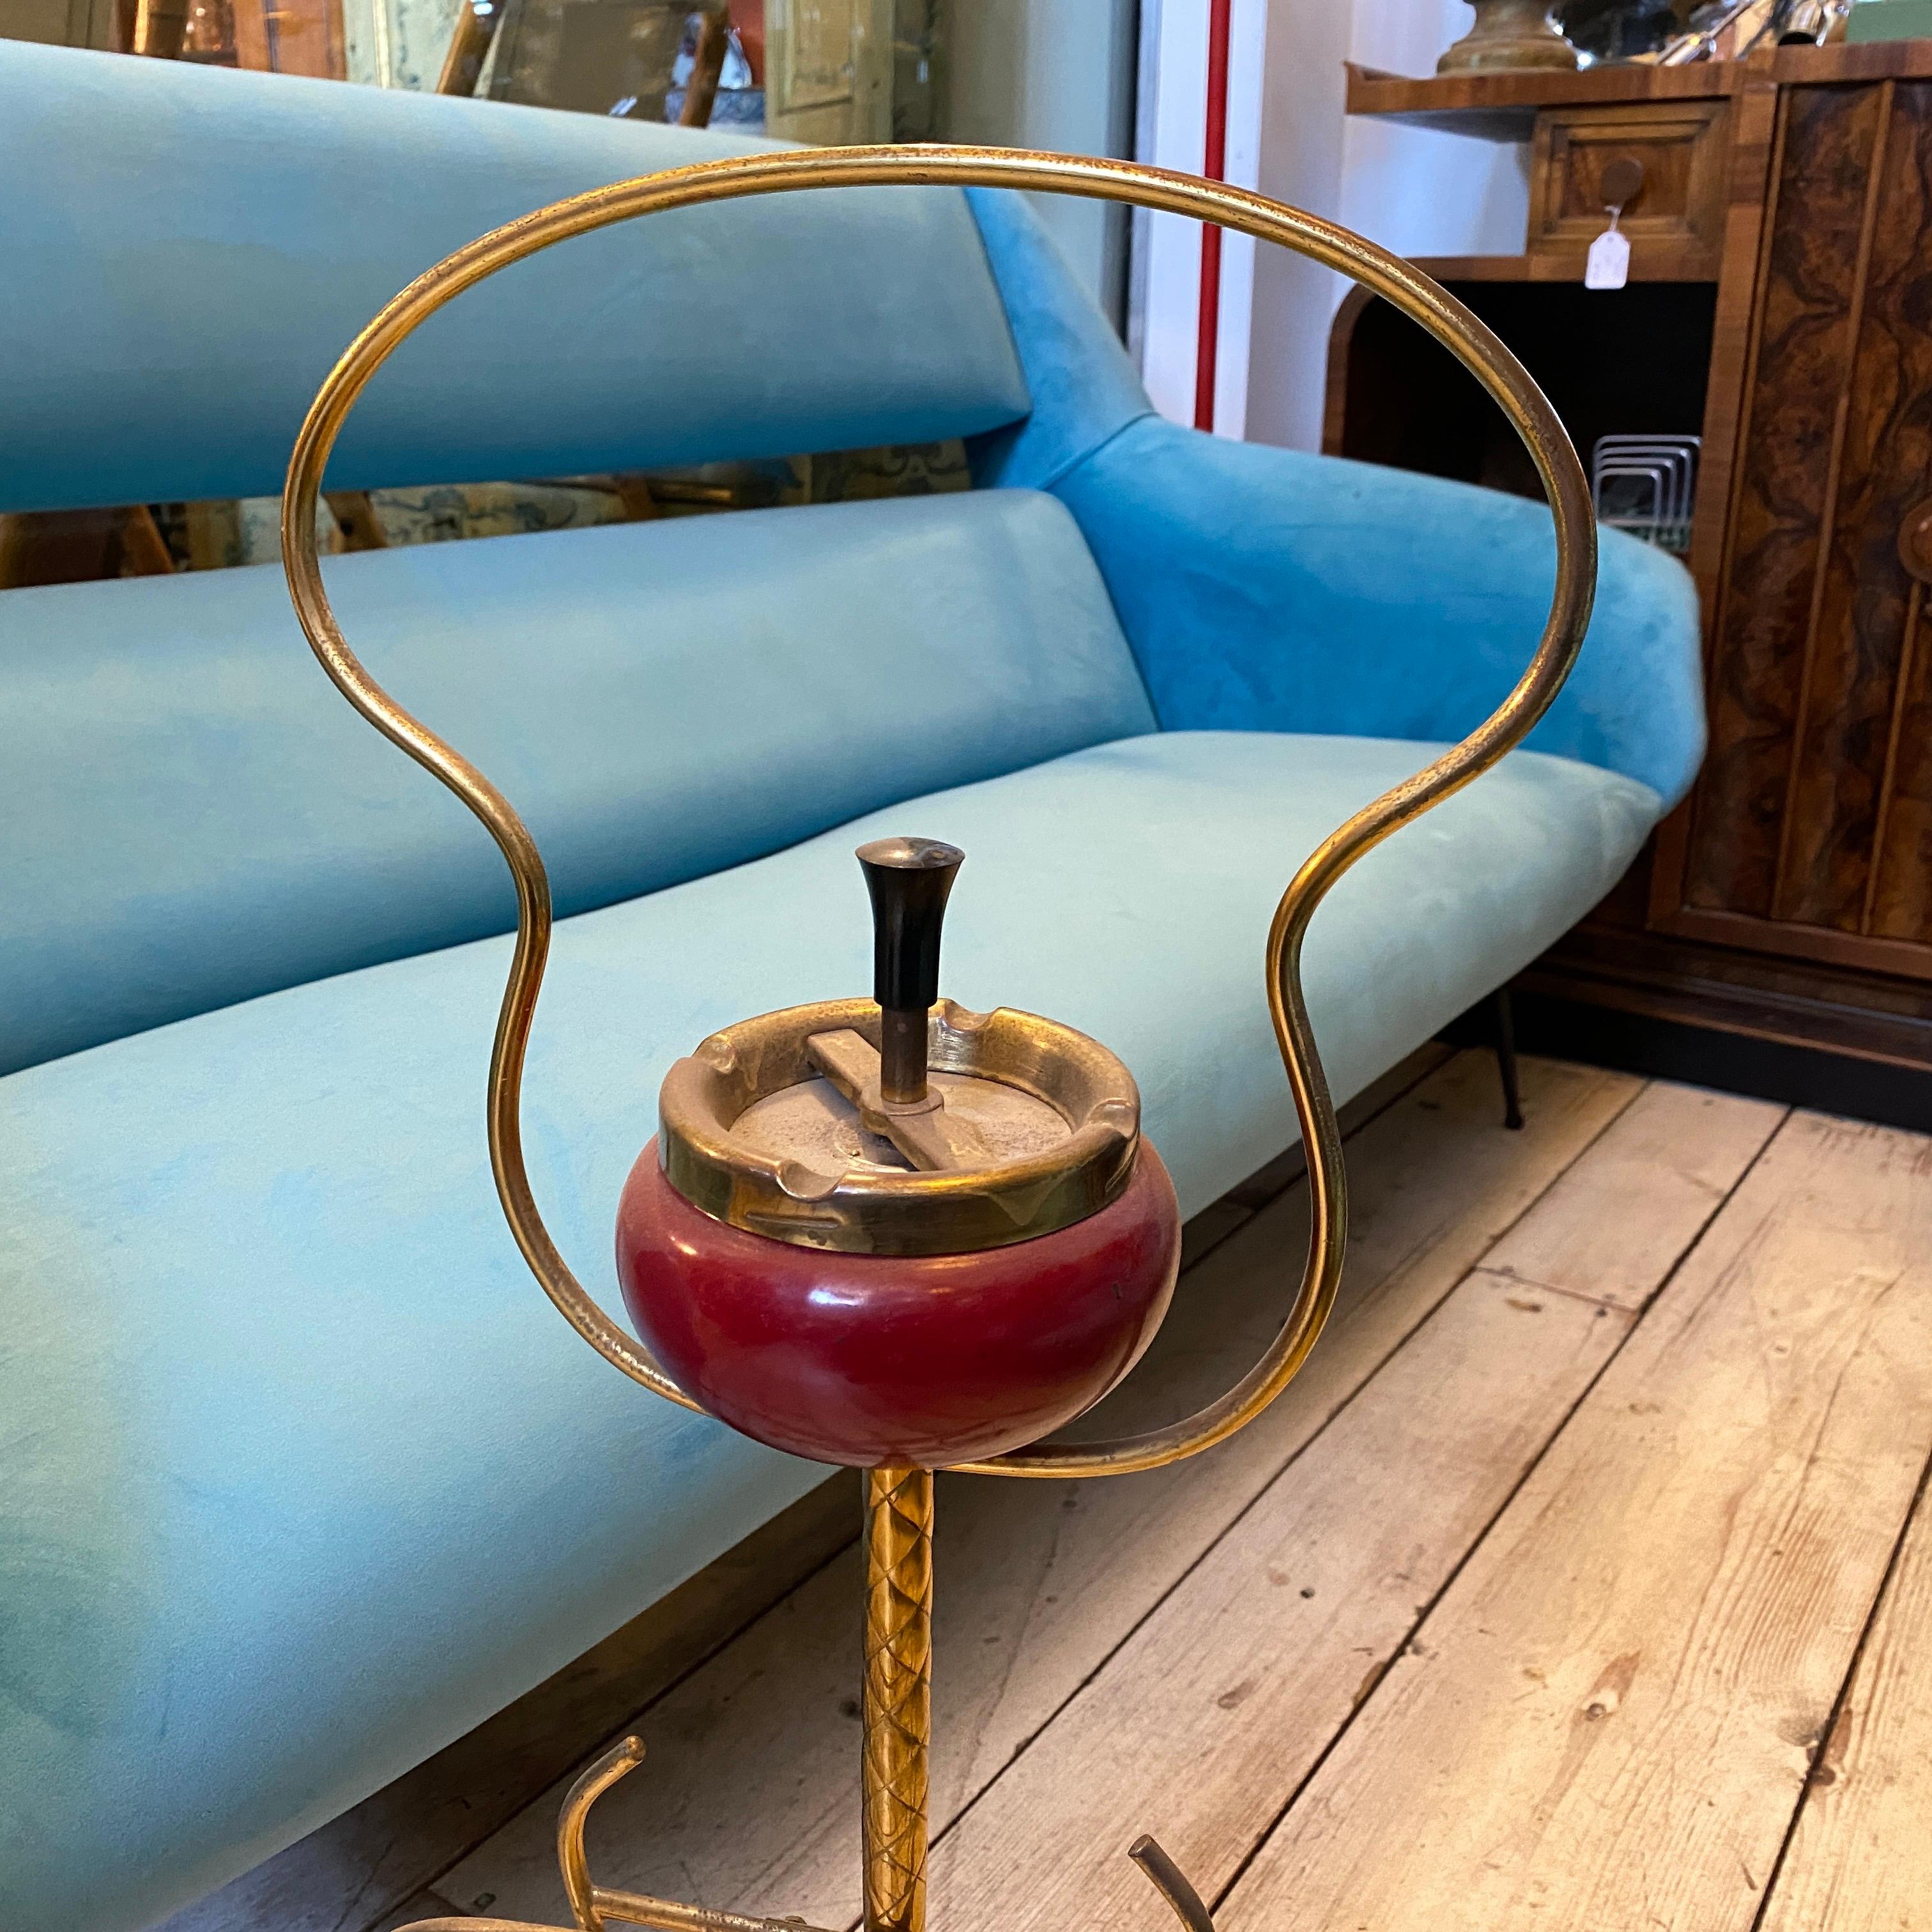 An italian brass tripode ashtray, usable near an armchair. It's in original nice vintage conditions and patina. The tripod ashtray is crafted from brass, a popular material choice during the Mid-Century Modern period for its durability and warm